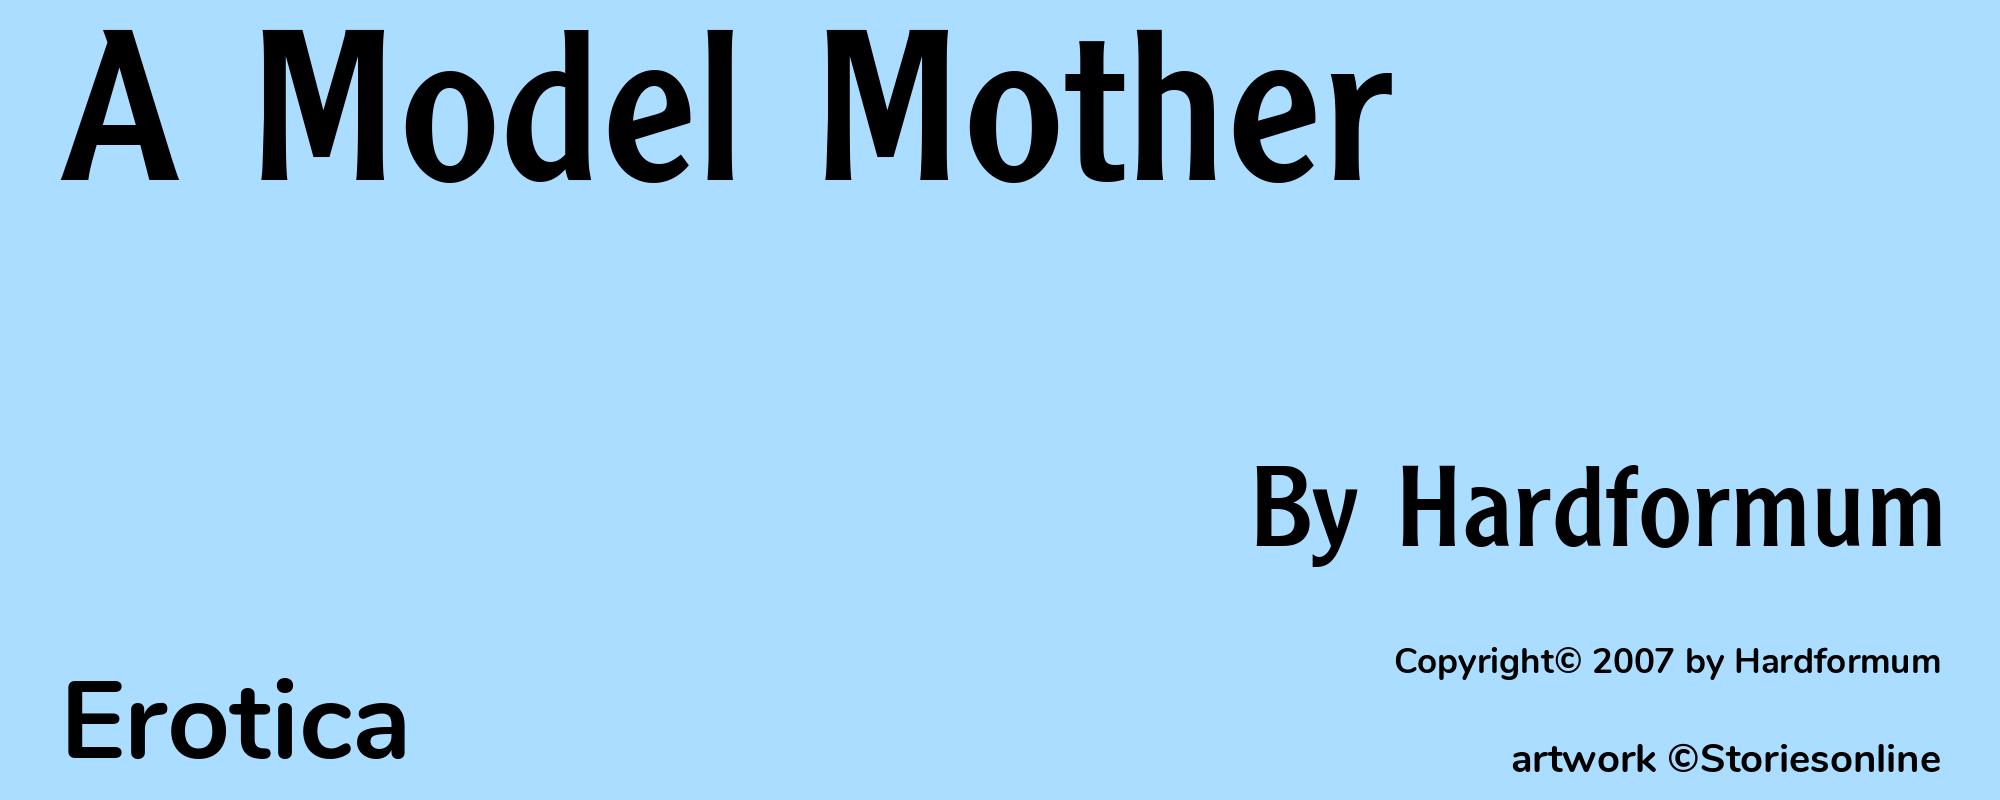 A Model Mother - Cover